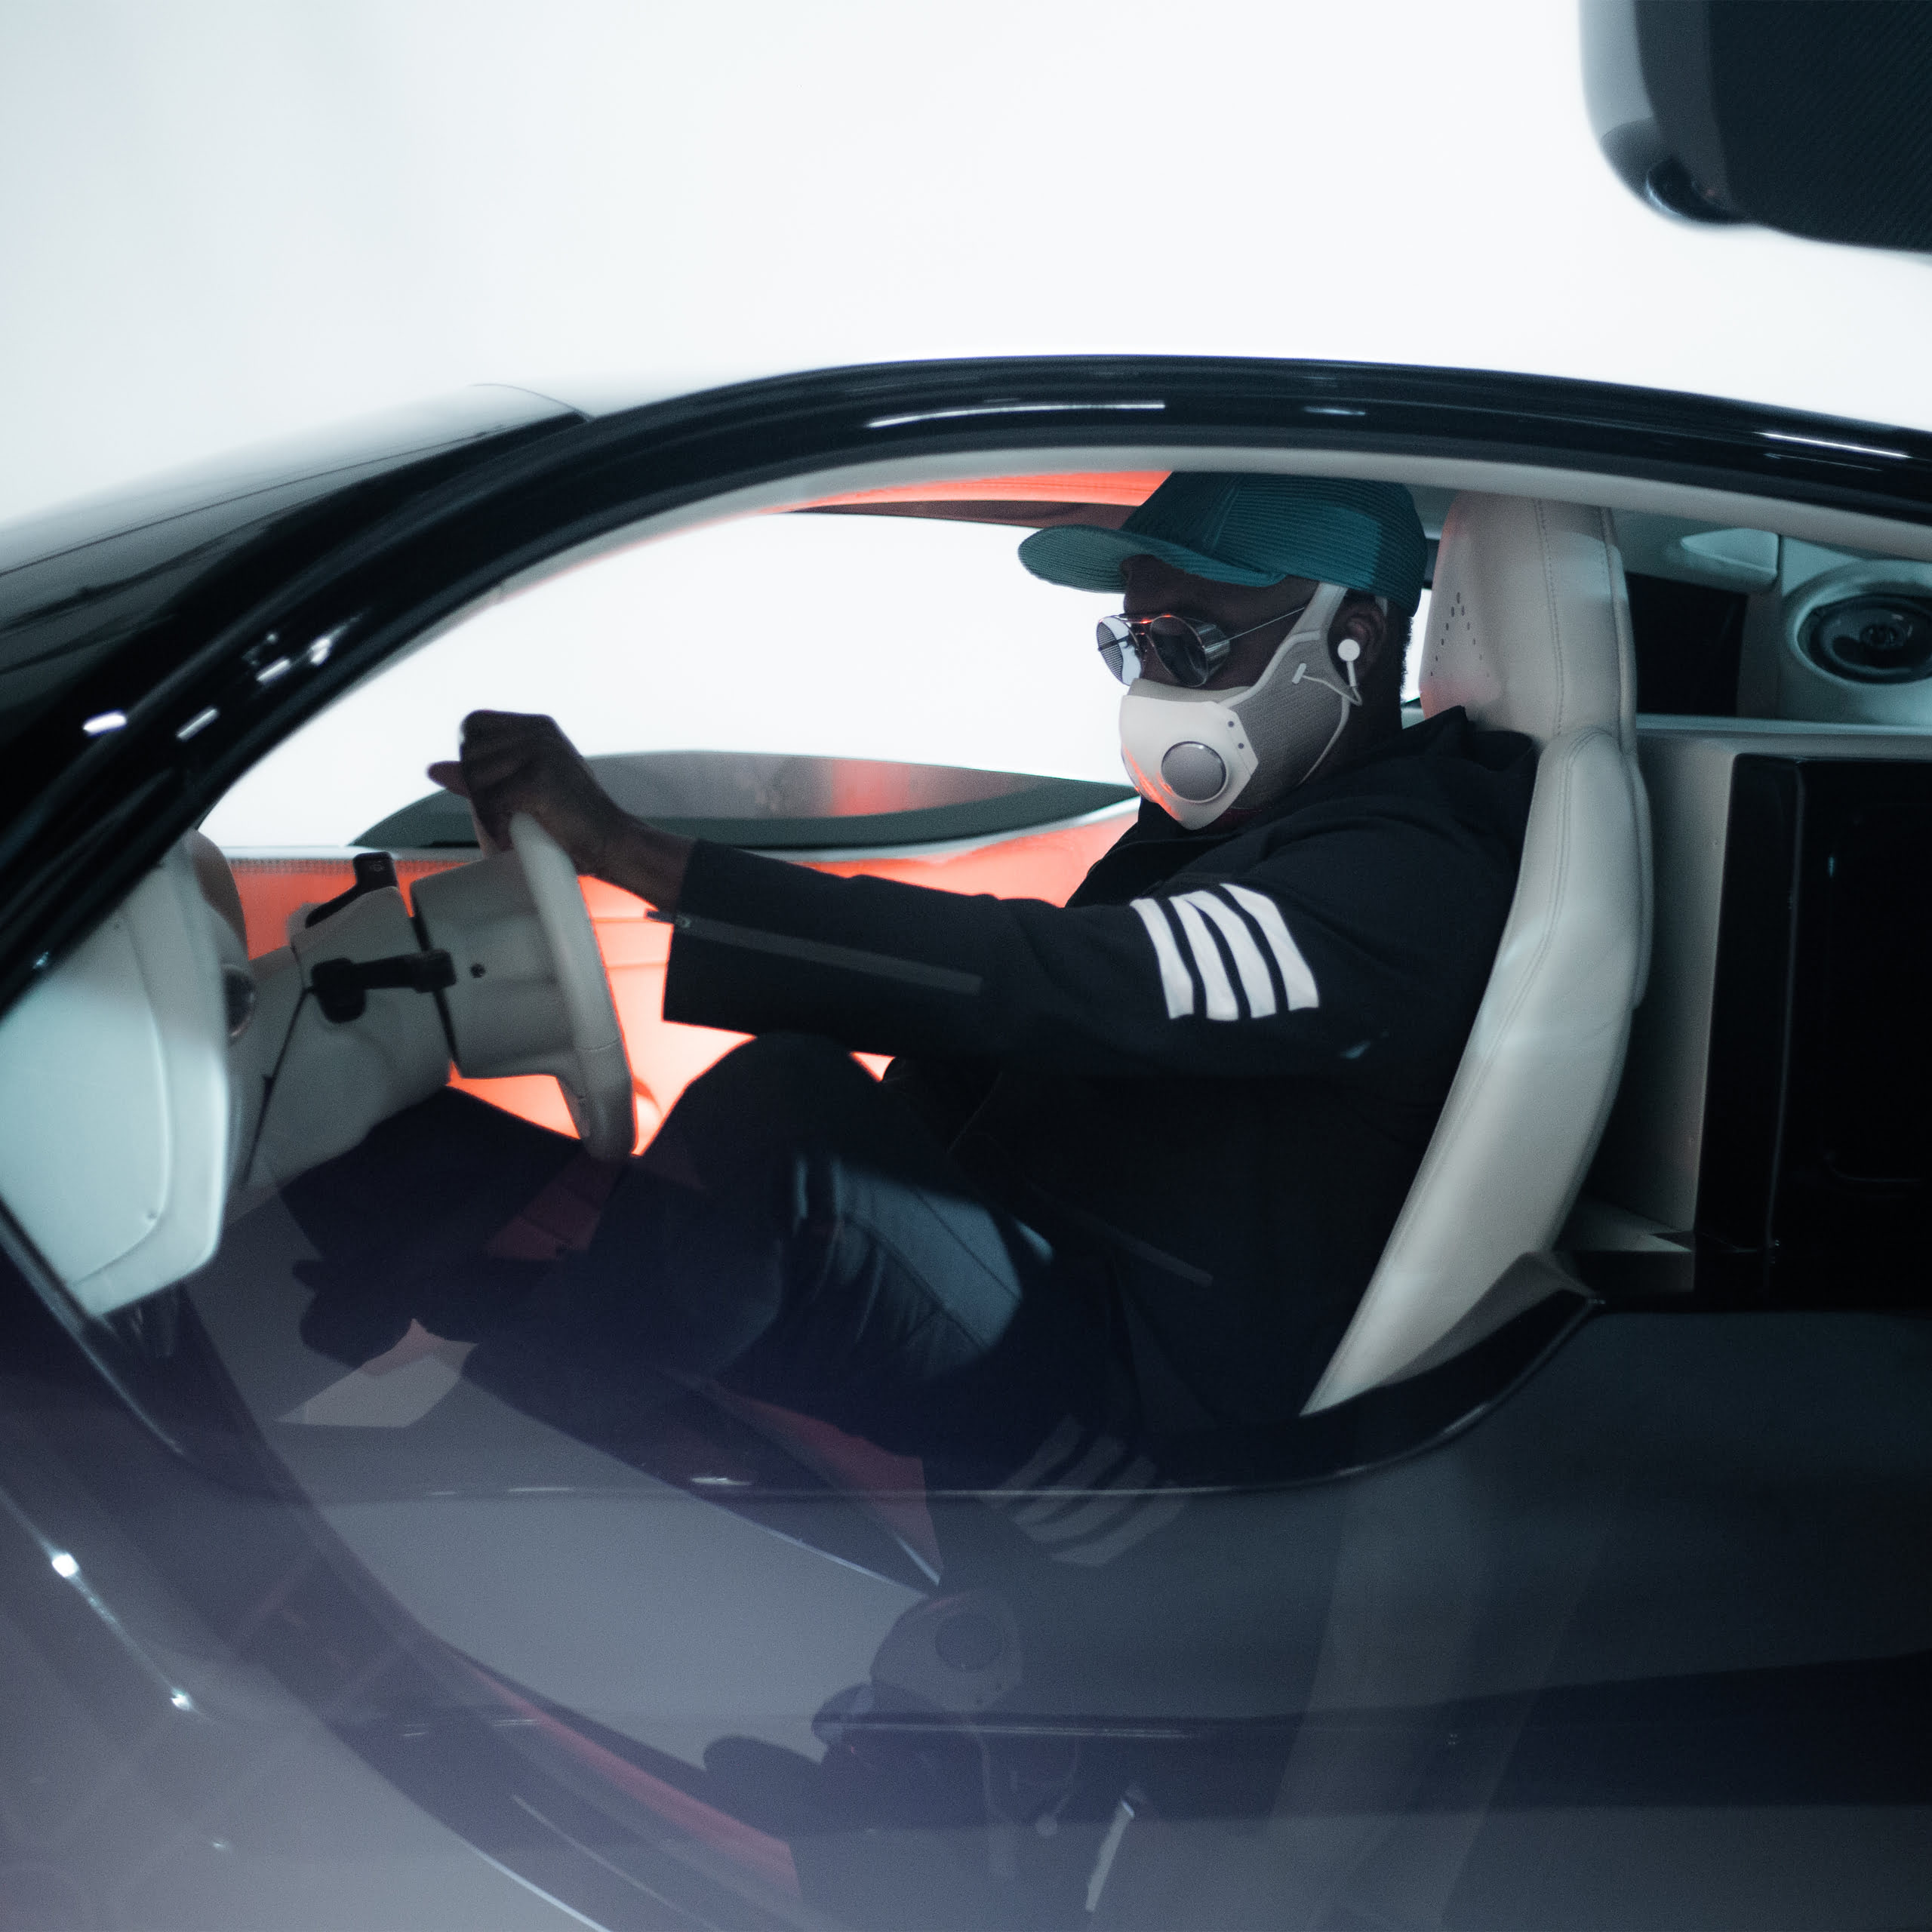 A photo of Will.I.Am sitting in his Mercedes-AMG car.